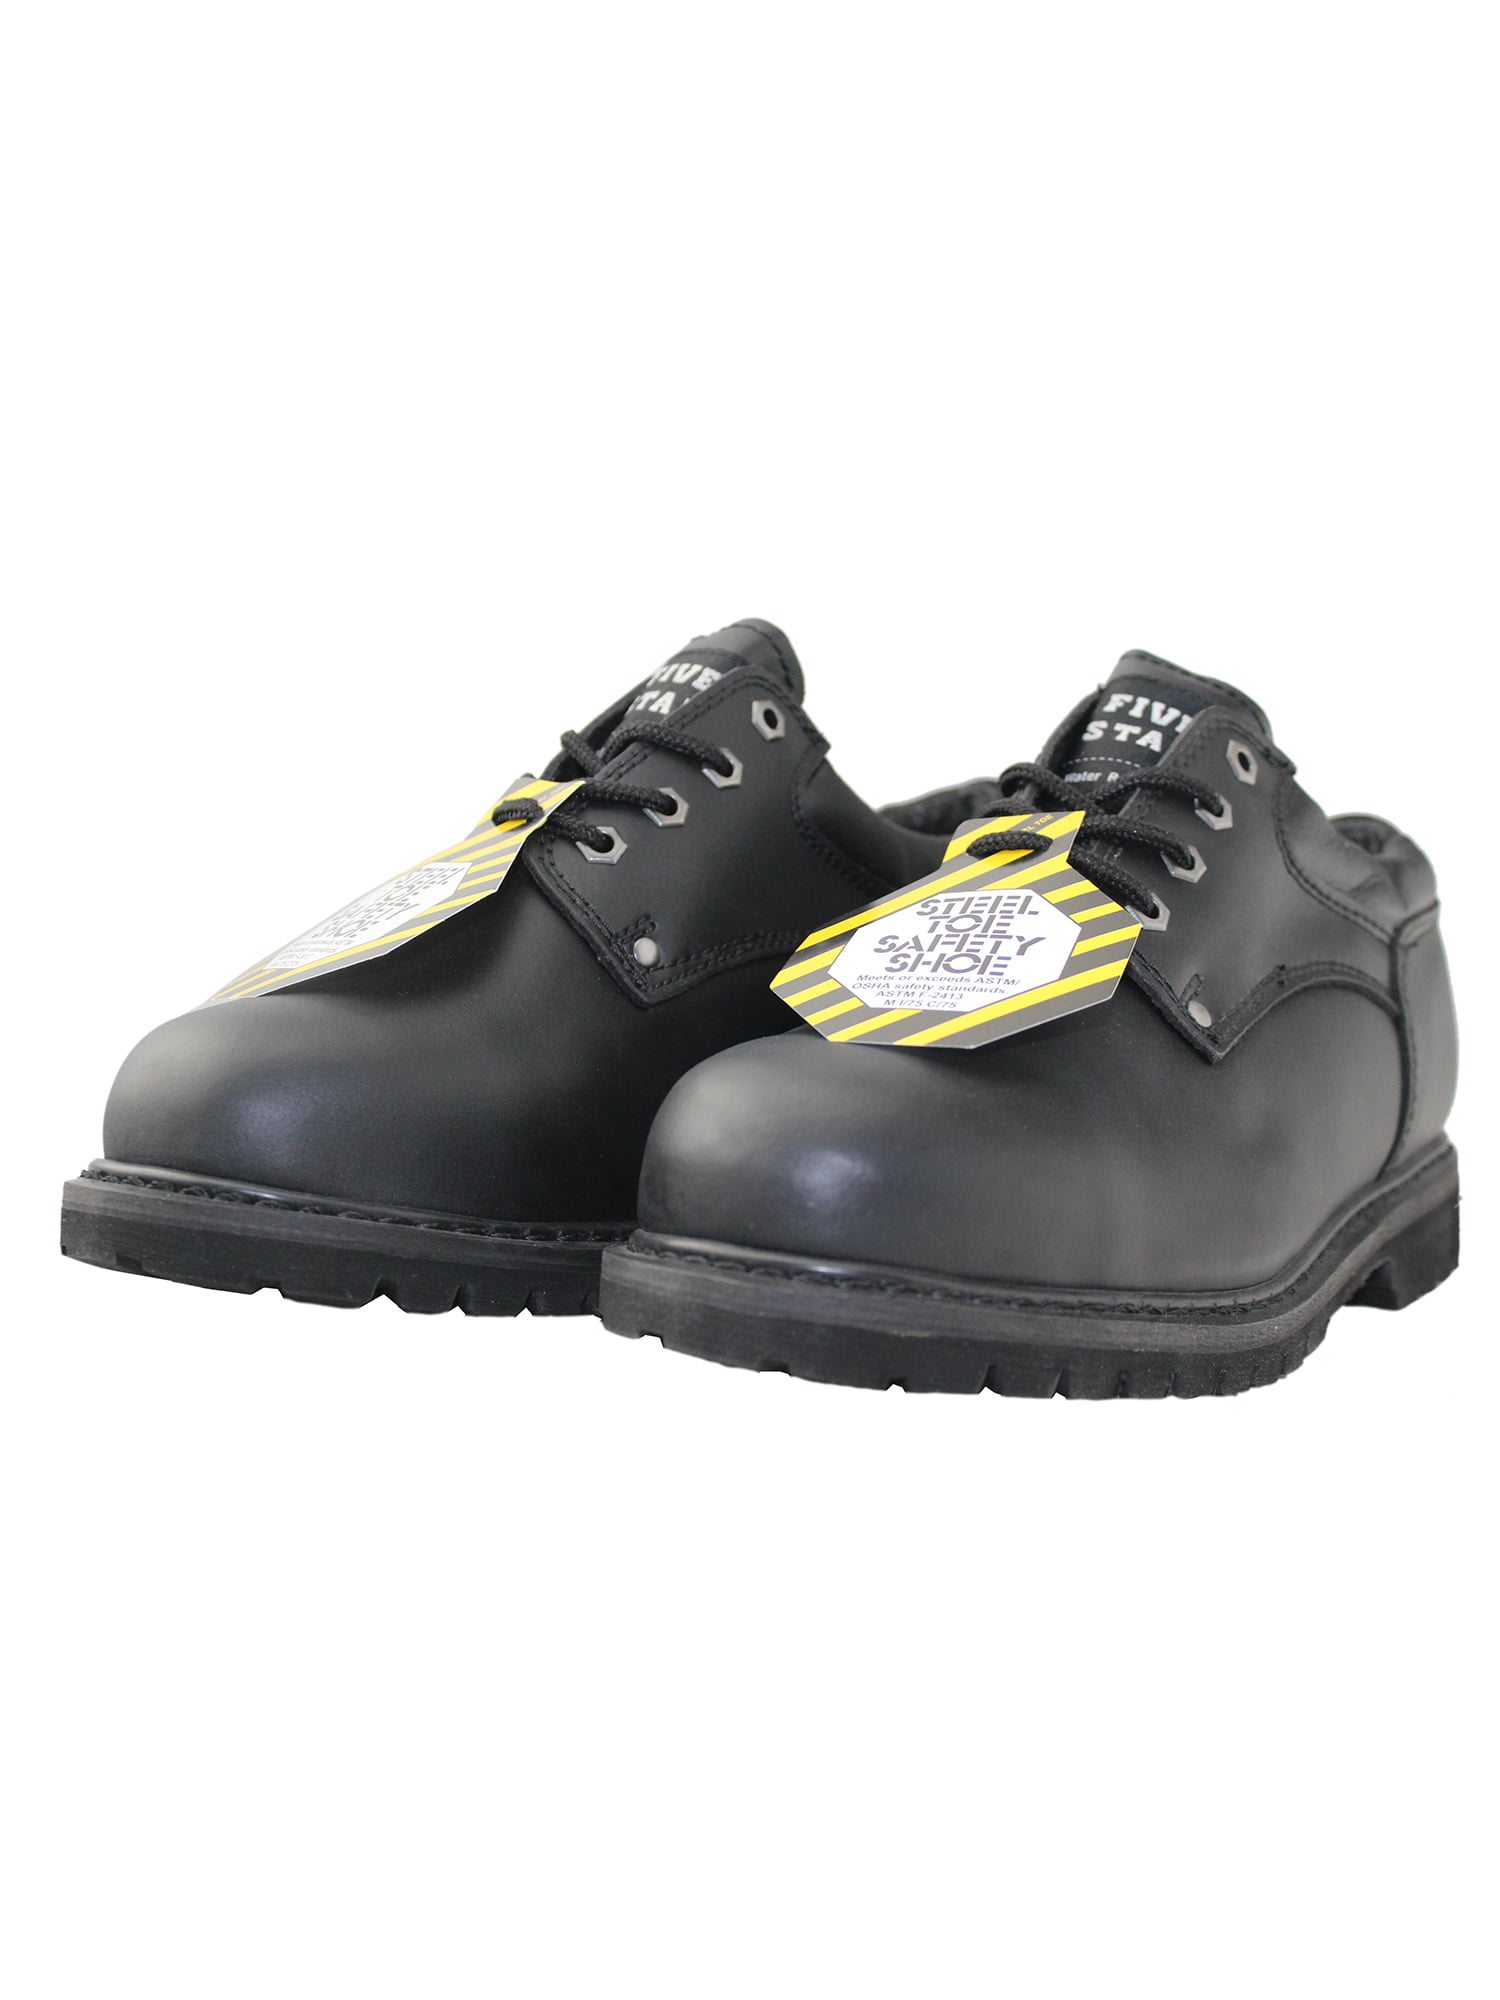 Steel Toe Men Work Shoes Insulated 